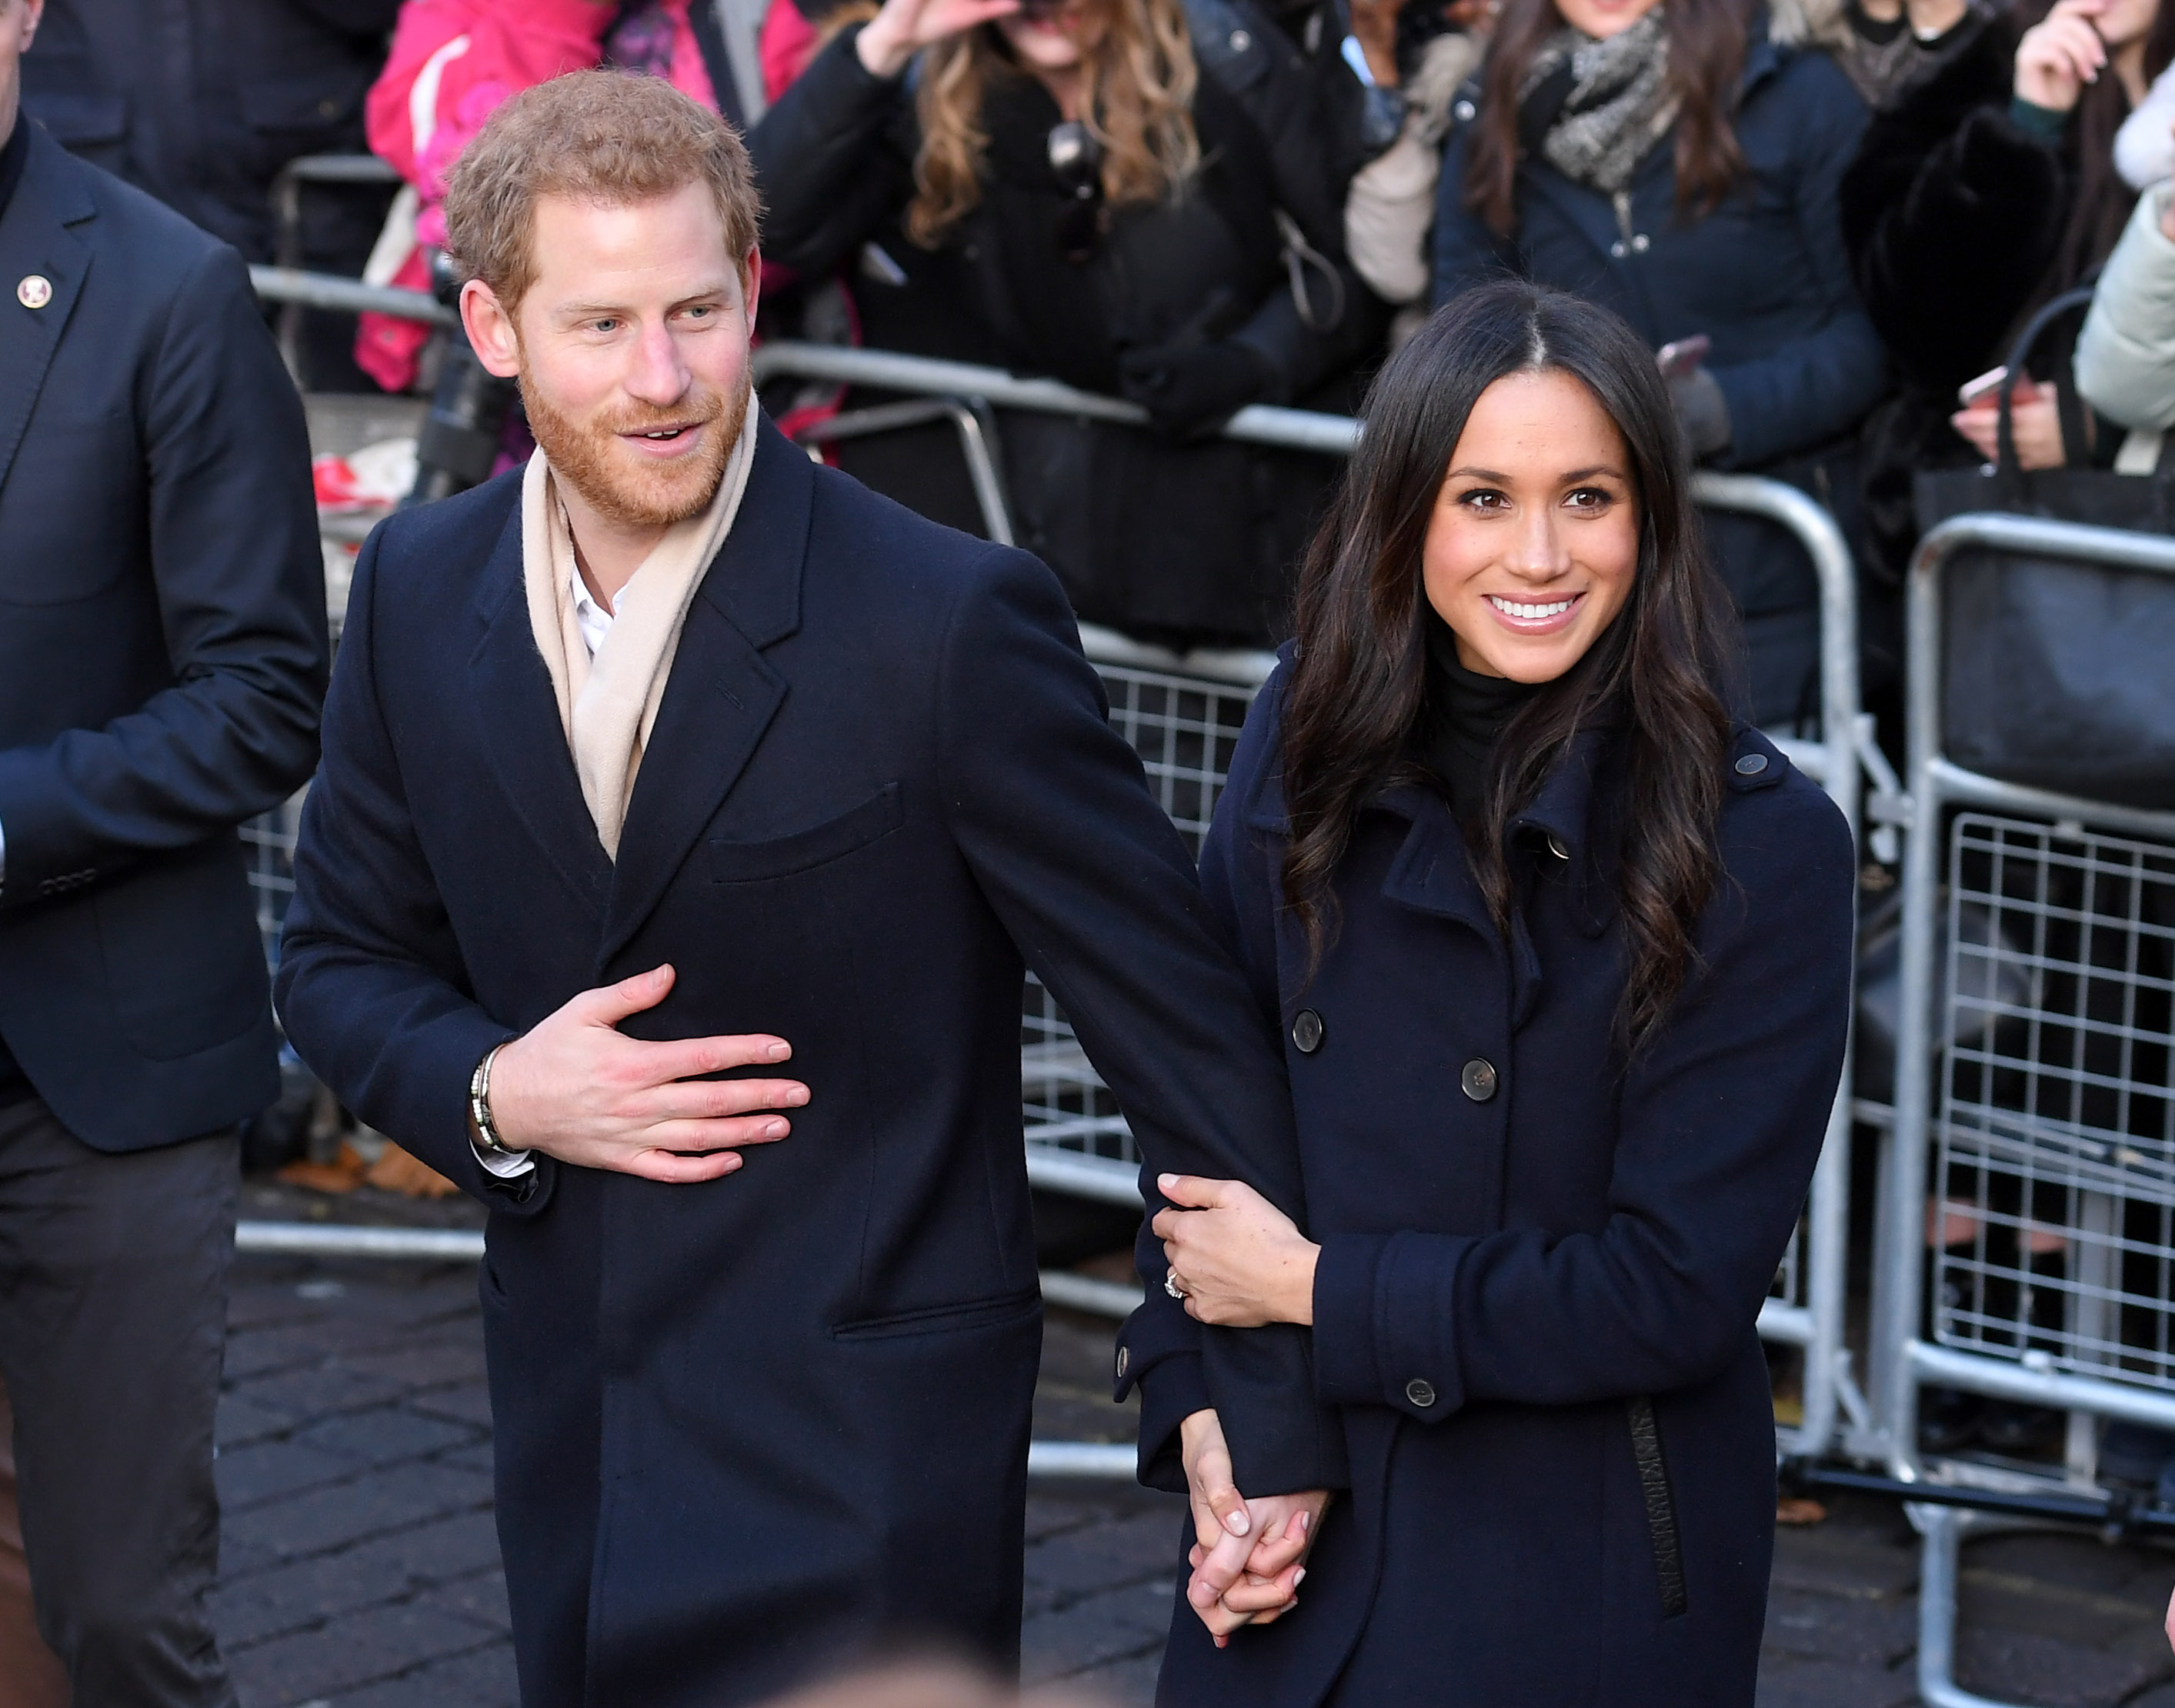 Prince Harry and fiancee Meghan Markle attend the Terrence Higgins Trust World AIDS Day charity fair at Nottingham Contemporary on December 1, 2017 in Nottingham, England. (Karwai Tang—WireImage/Getty Images)